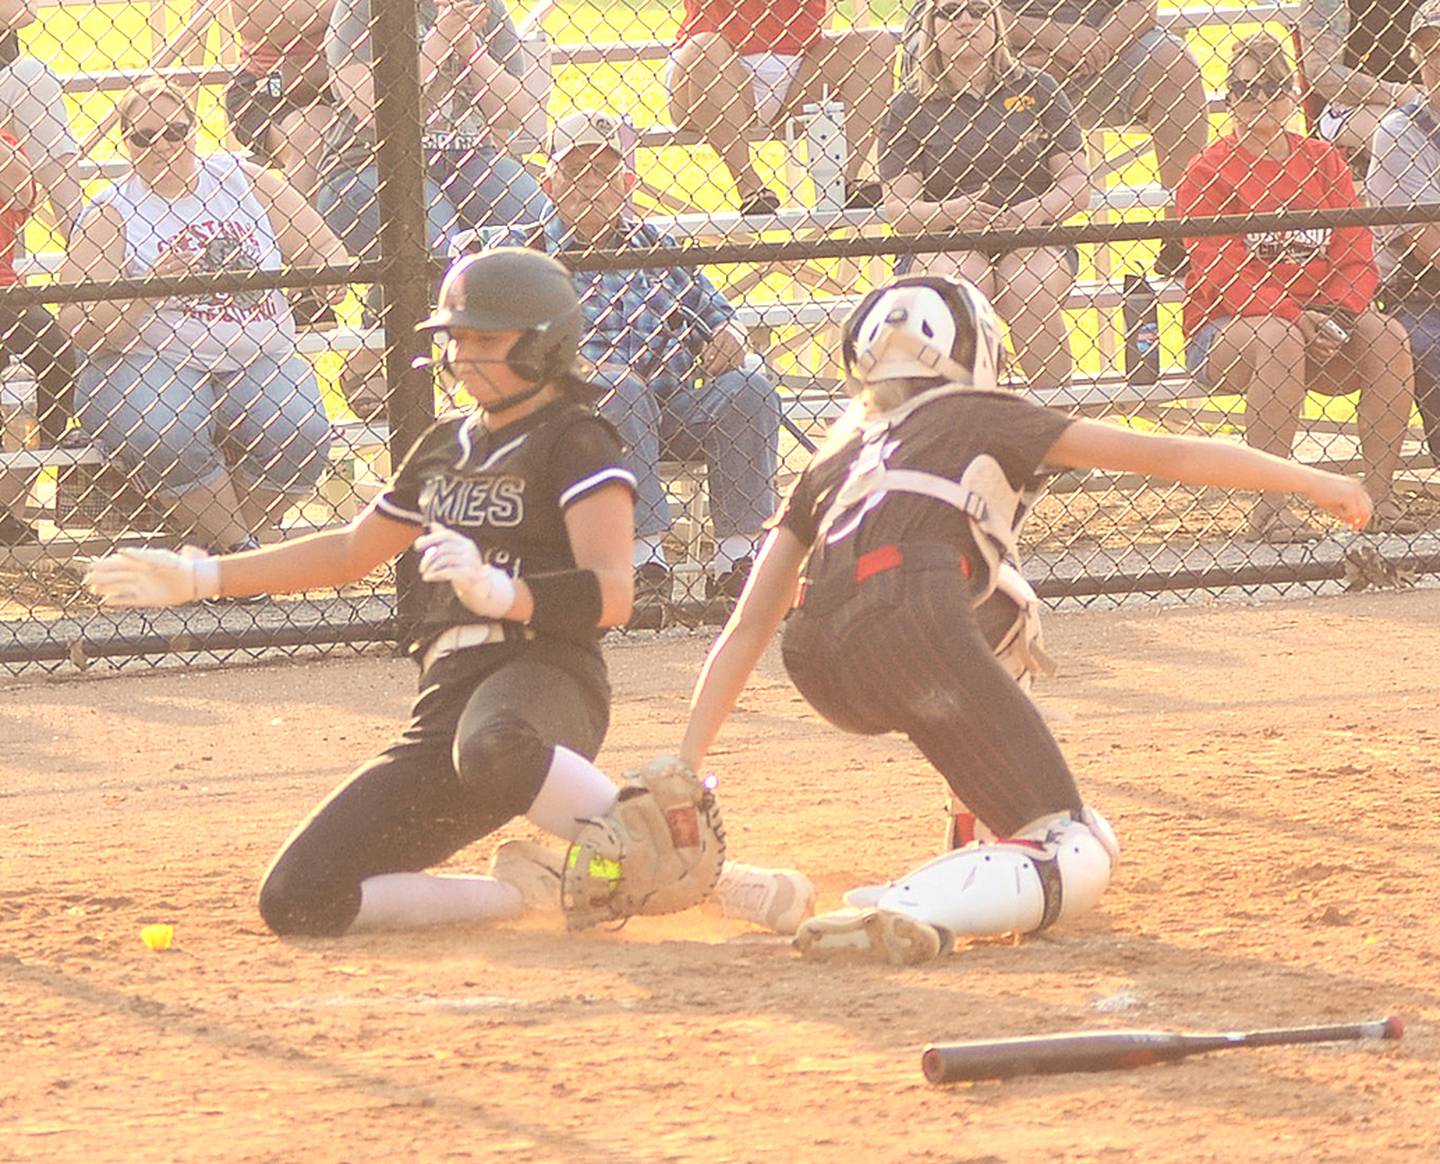 Camryn Johnson of Ames is tagged out at the plate by Creston catcher Ava Adamson after Adamson received a throw from center fielder Jersey Foote on a single by Lillie Galvin in Monday's opener. Foote also homered in the game and Adamson hit a triple off the top of the center field fence in the 12-4 loss.